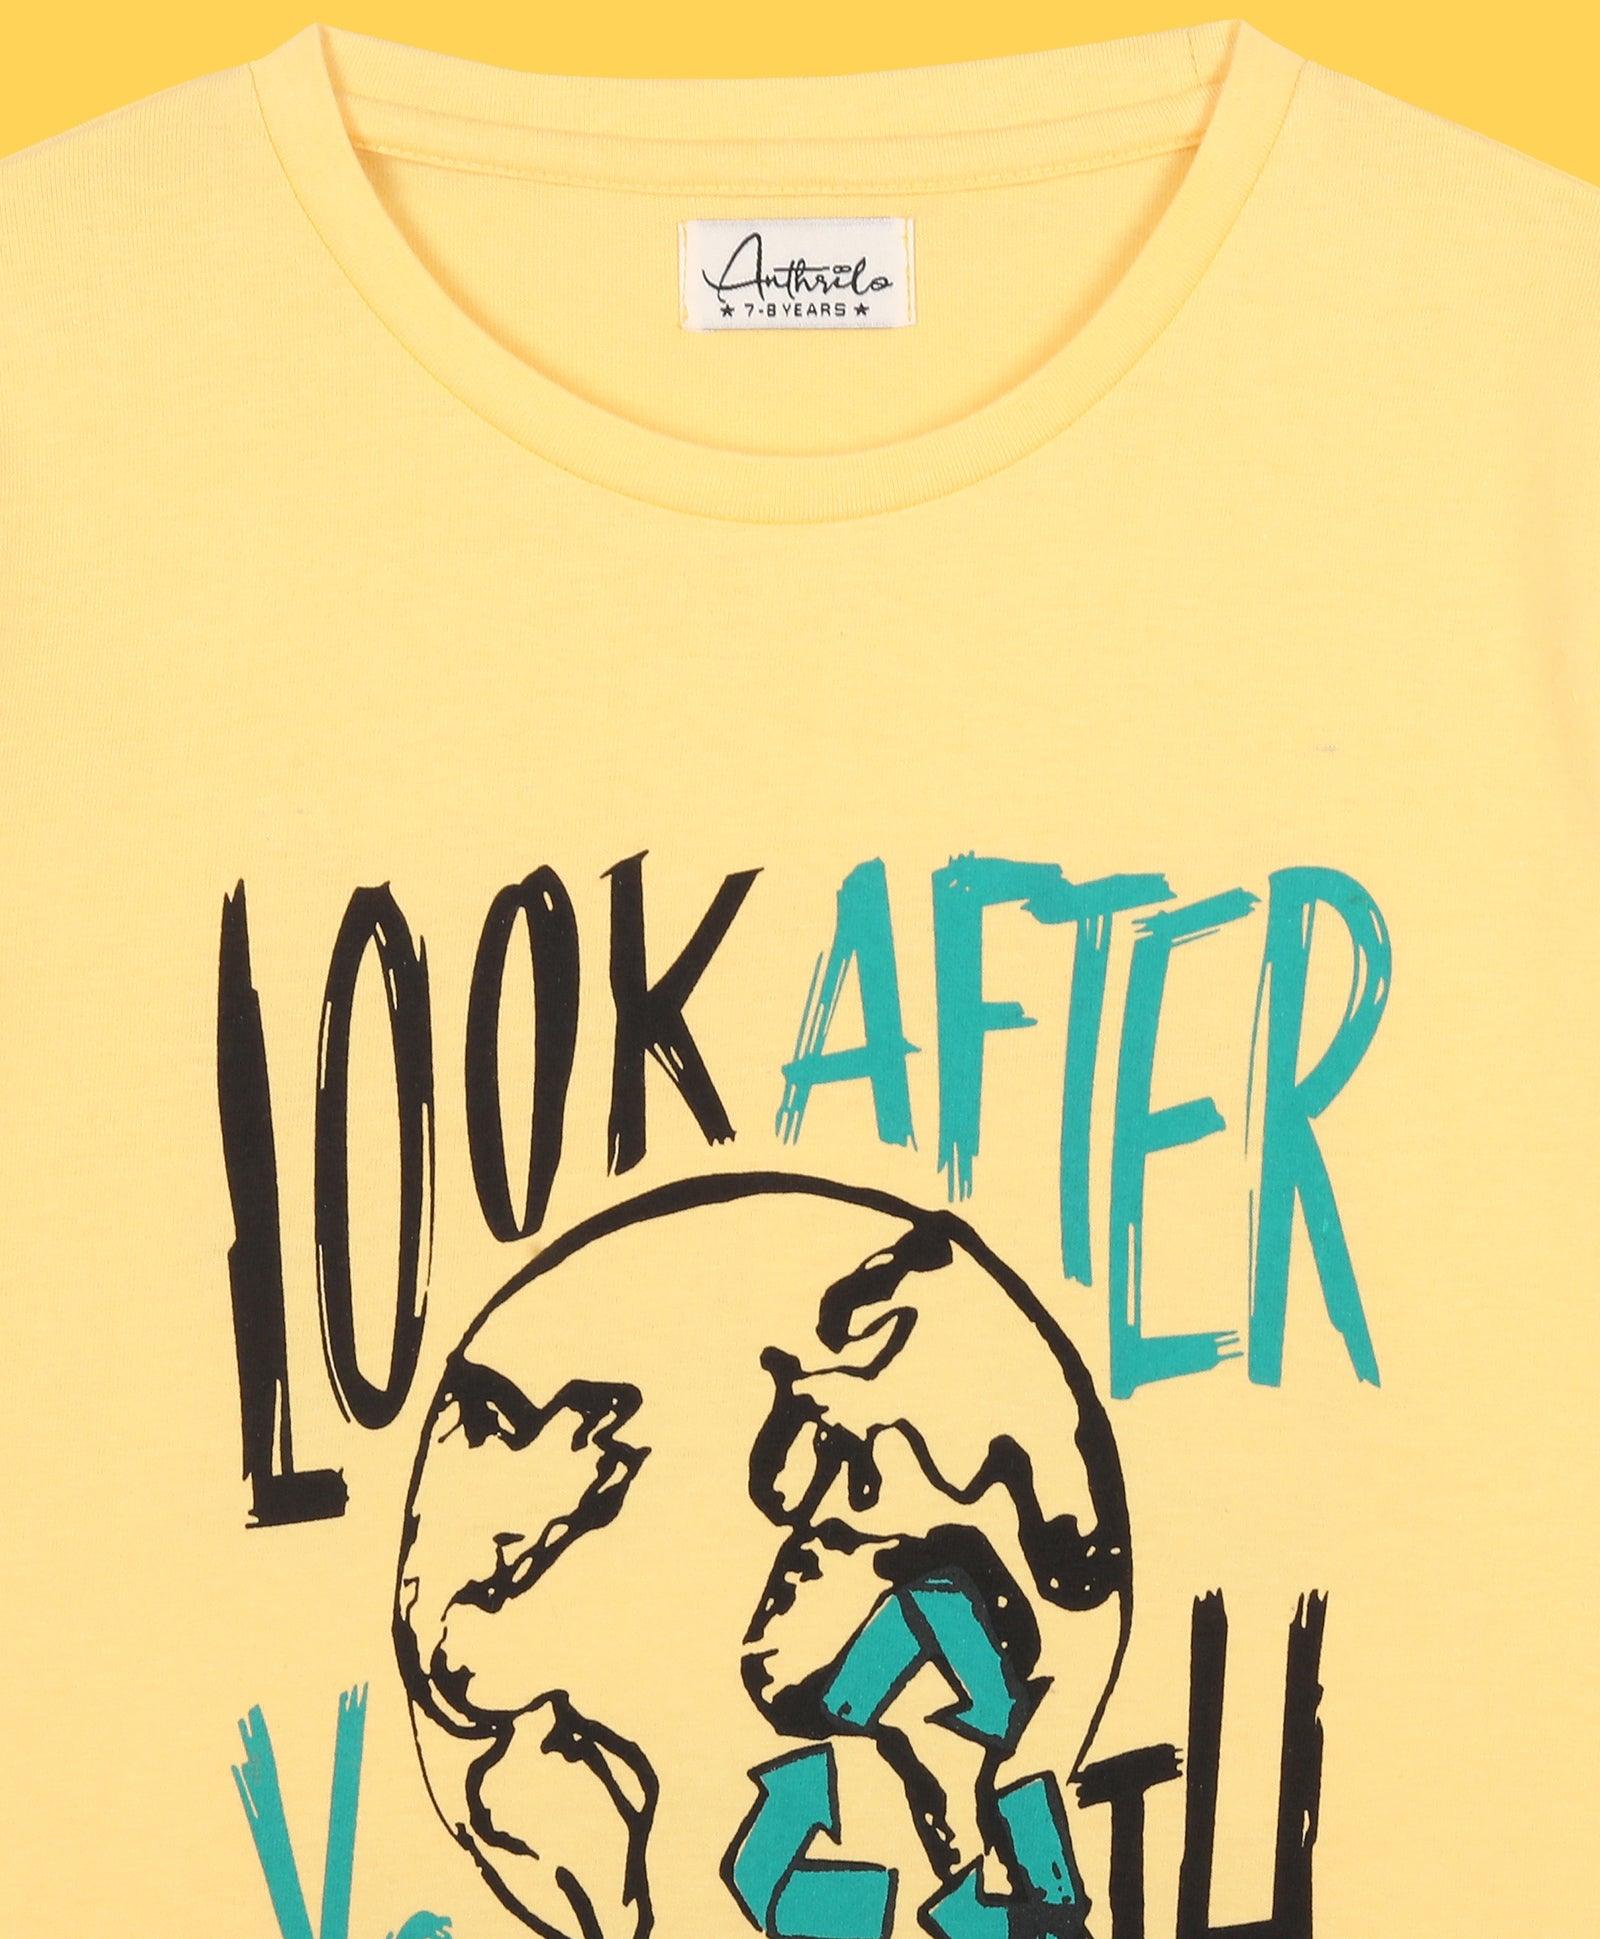 LOOK AFTER EARTH YELLOW BOYS T-SHIRT - YELLOW - Anthrilo 